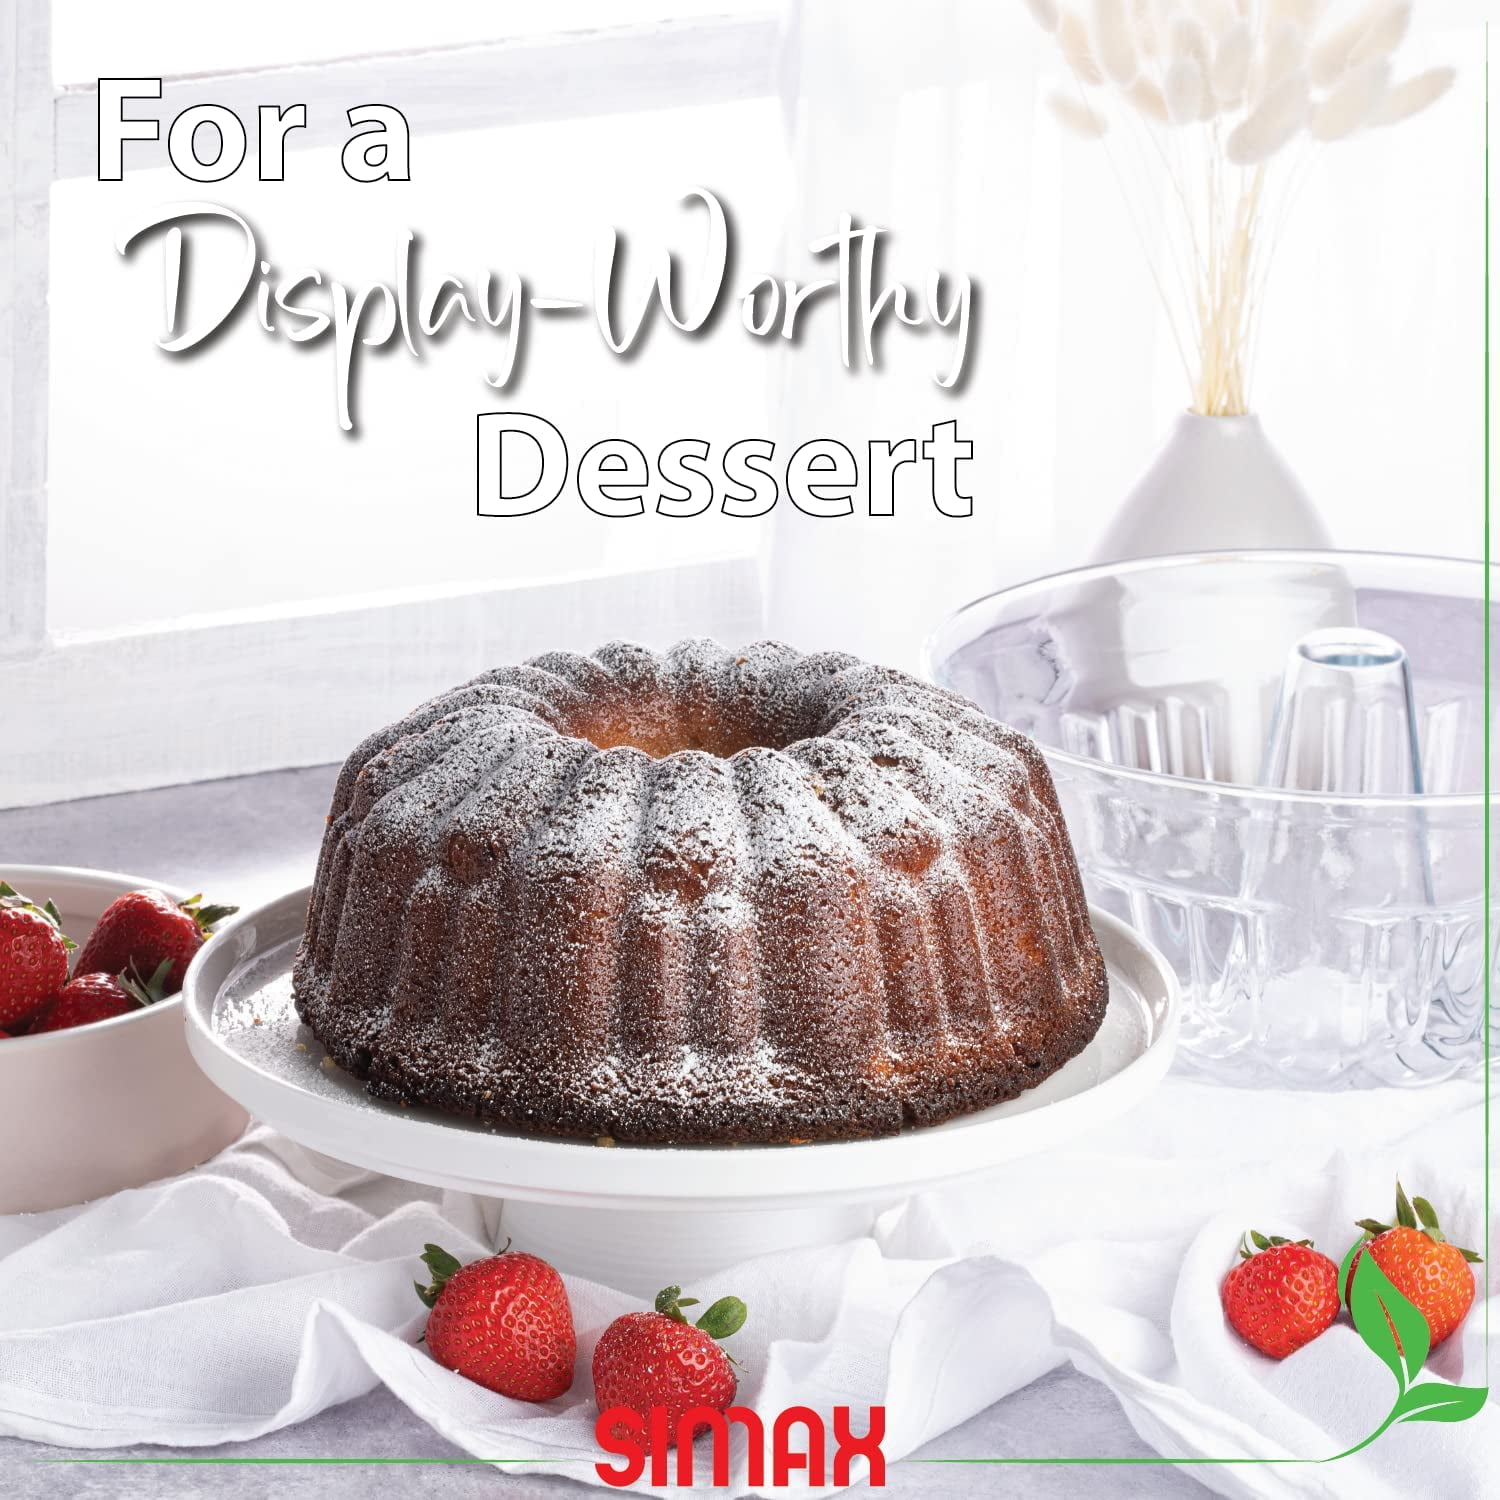 SIMAX Clear Glass Fluted Bundt Pan, Heat, Cold, and Shock Proof, Holds 1.4  Quarts (5.4 Cups), Made in Europe, Great for Small Ring Cakes, Puddings